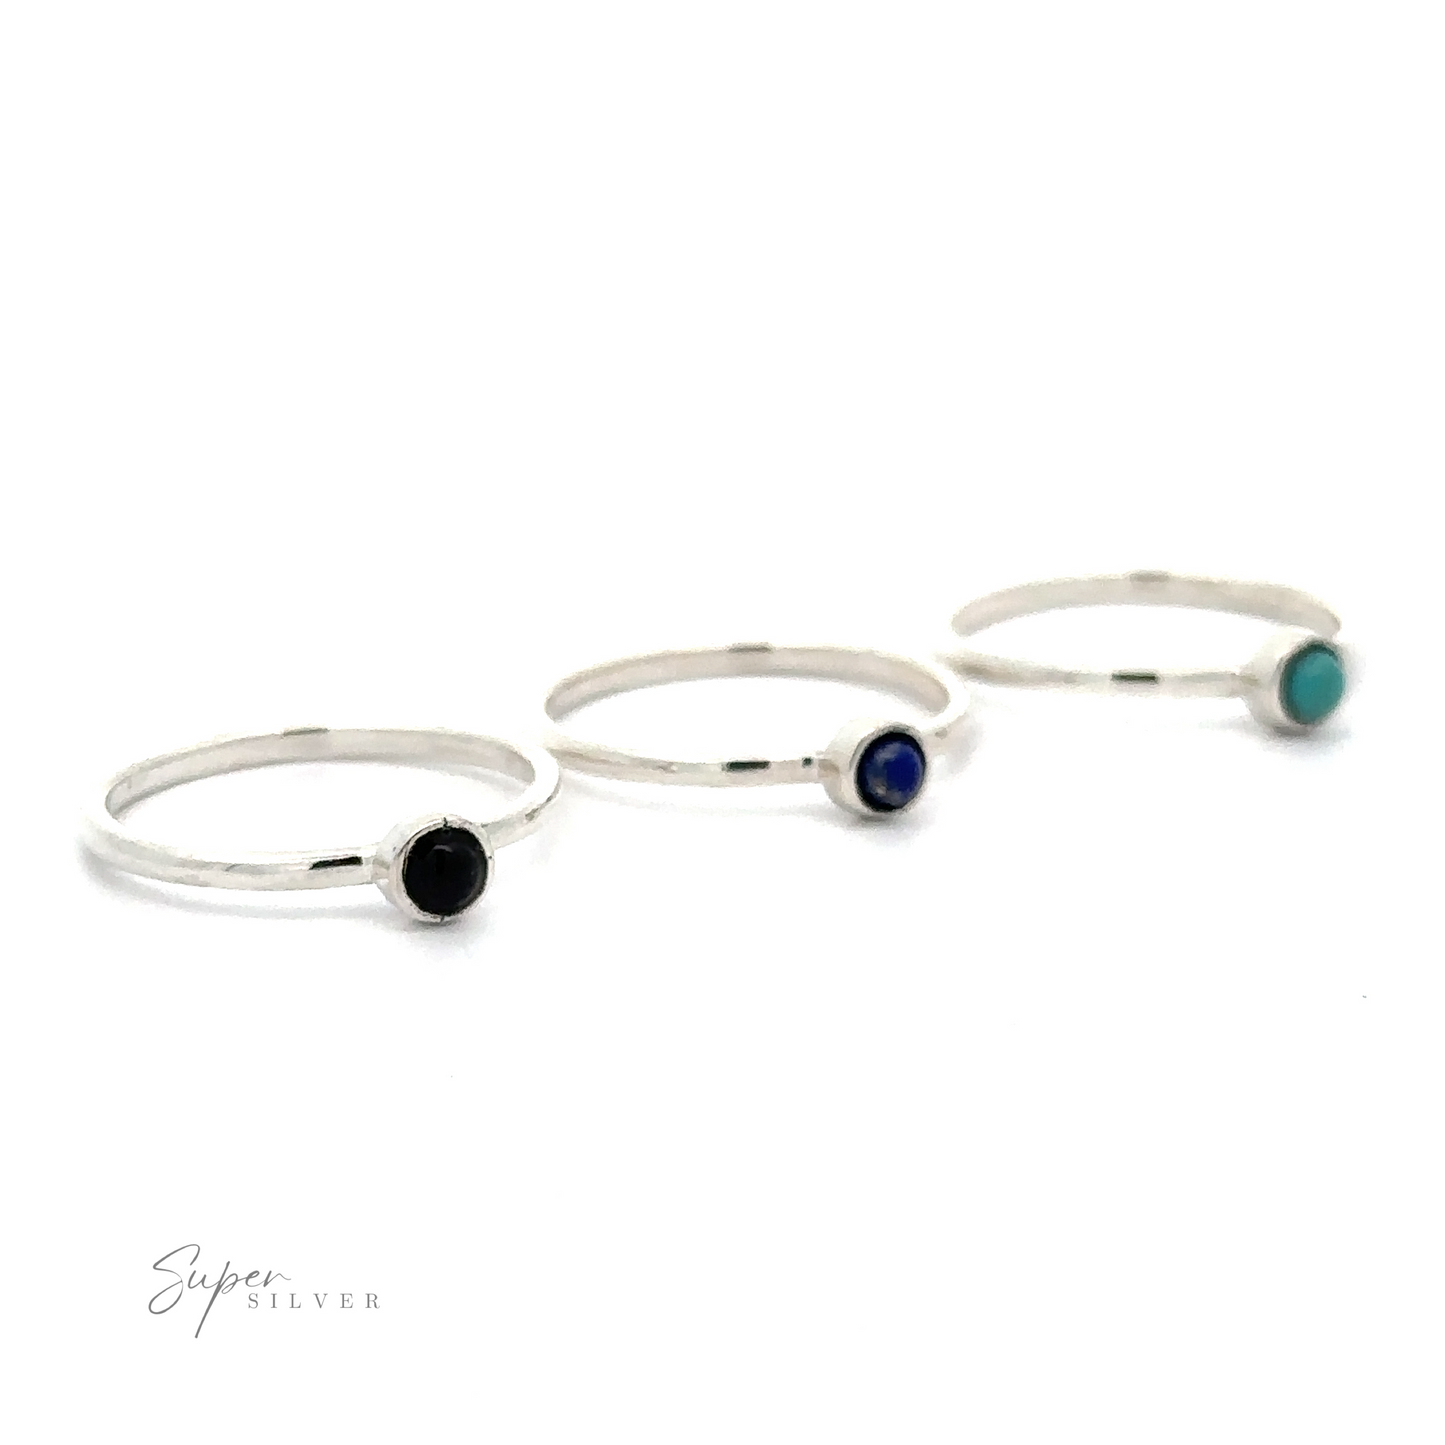 Three thin sterling silver rings with small round stones; one black, one blue, and one turquoise. The words "Dainty Stackable Round Gemstone Ring" appear in the bottom left corner. Perfect for minimalist fashion, these stackable rings are both elegant and versatile.